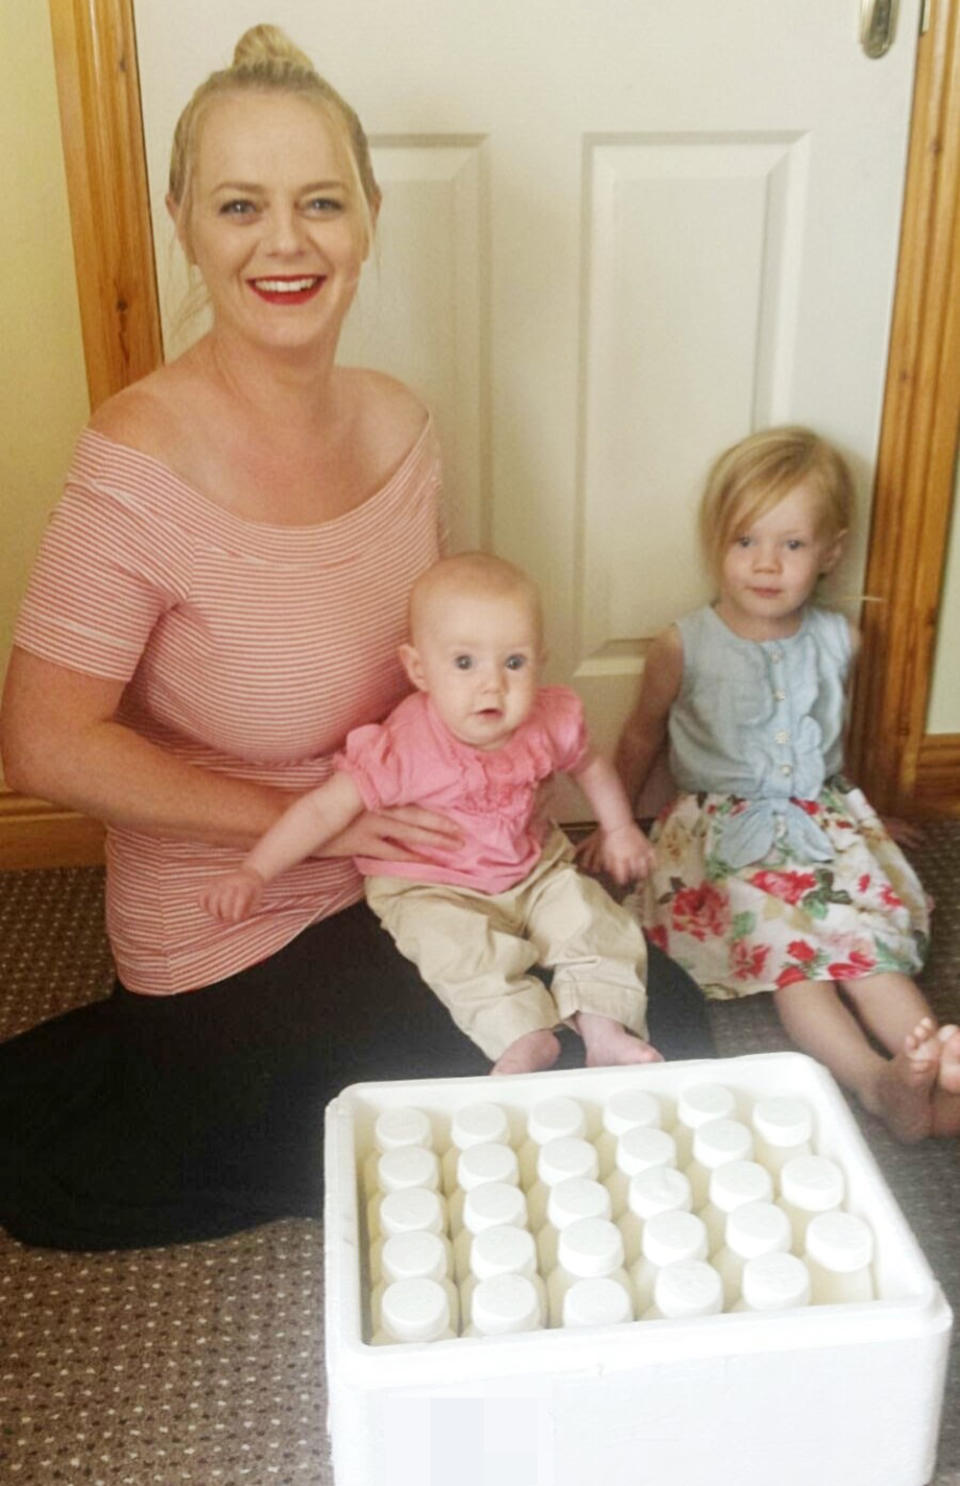 Natasha, pictured here with her daughters Grace and Ellie, and the milk she donated (PA Real Life/Collect)